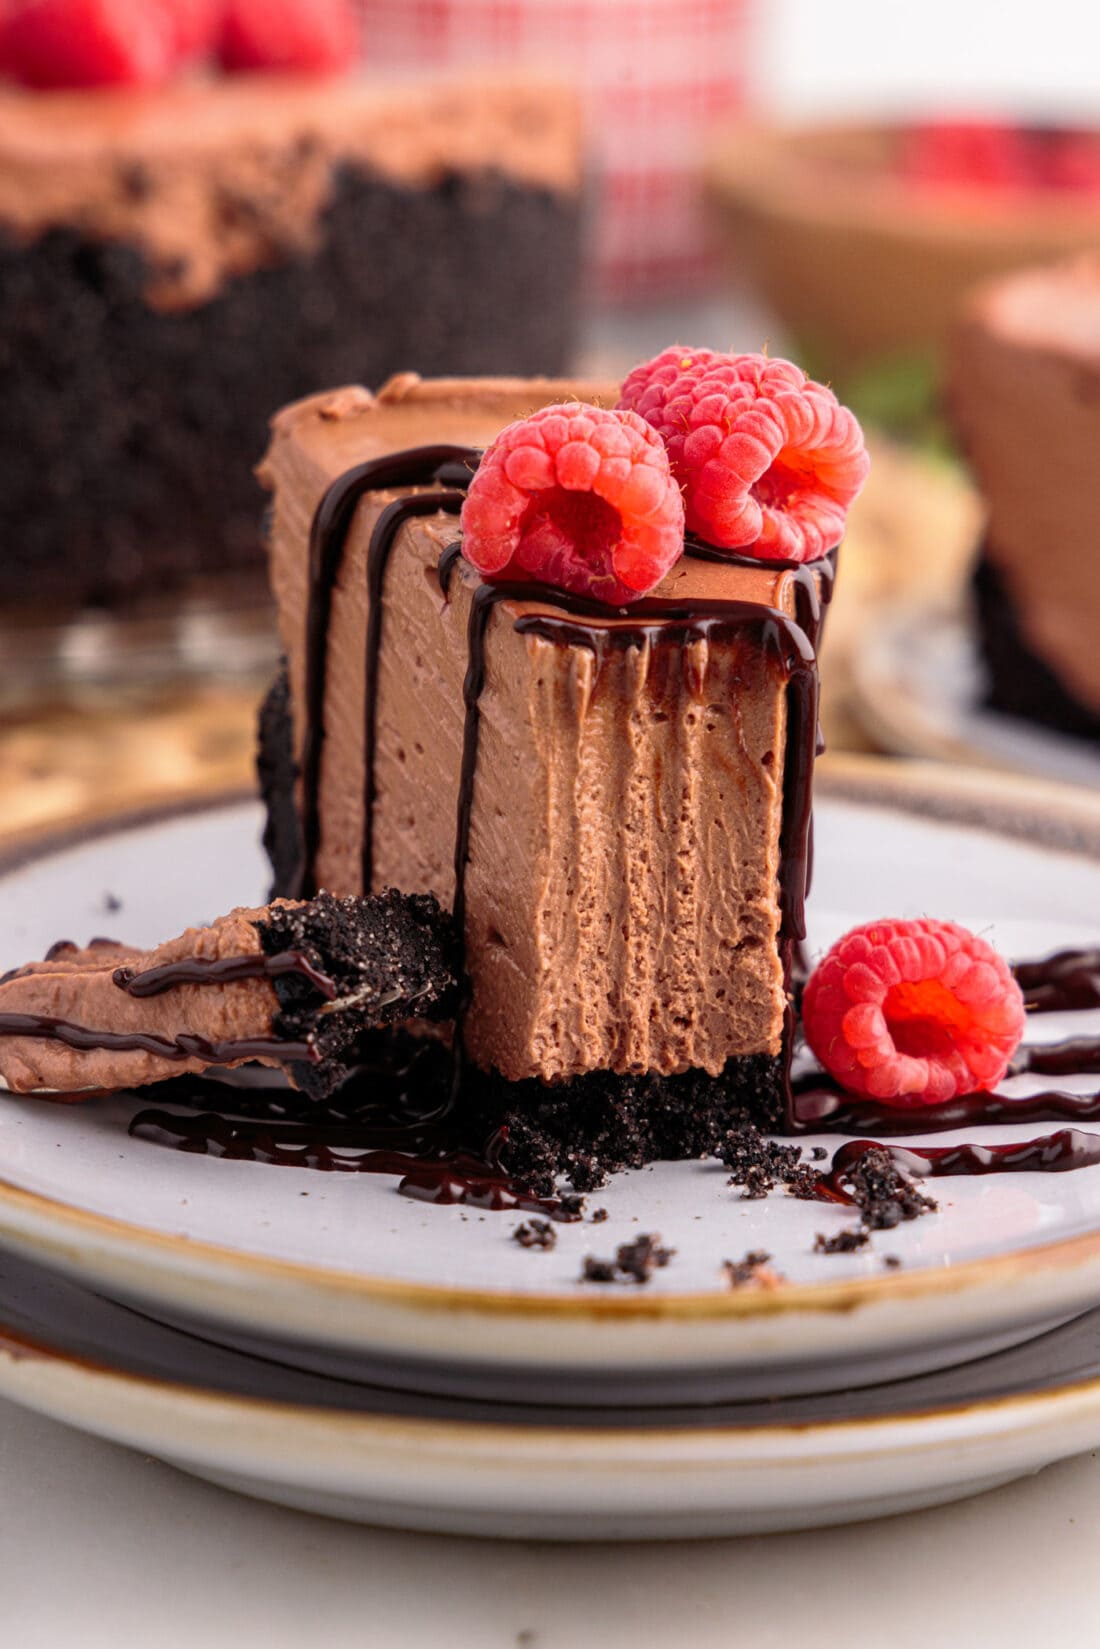 Slice of No Bake Chocolate Cheesecake on a plate with a bite taken out using a fork